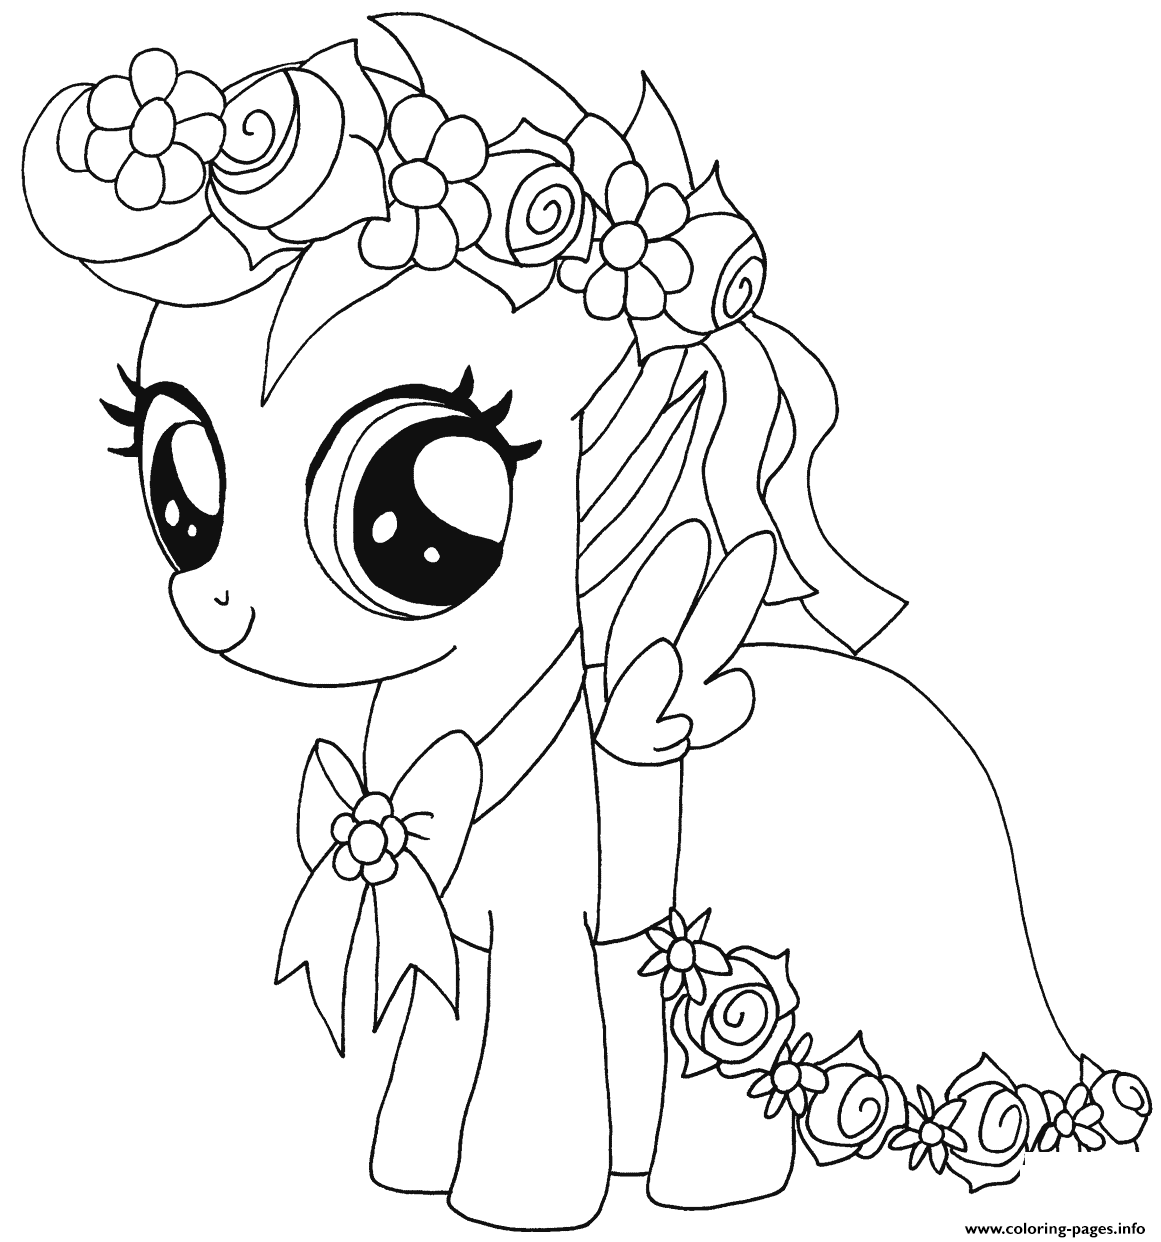 Lil Baby - Free Coloring Pages